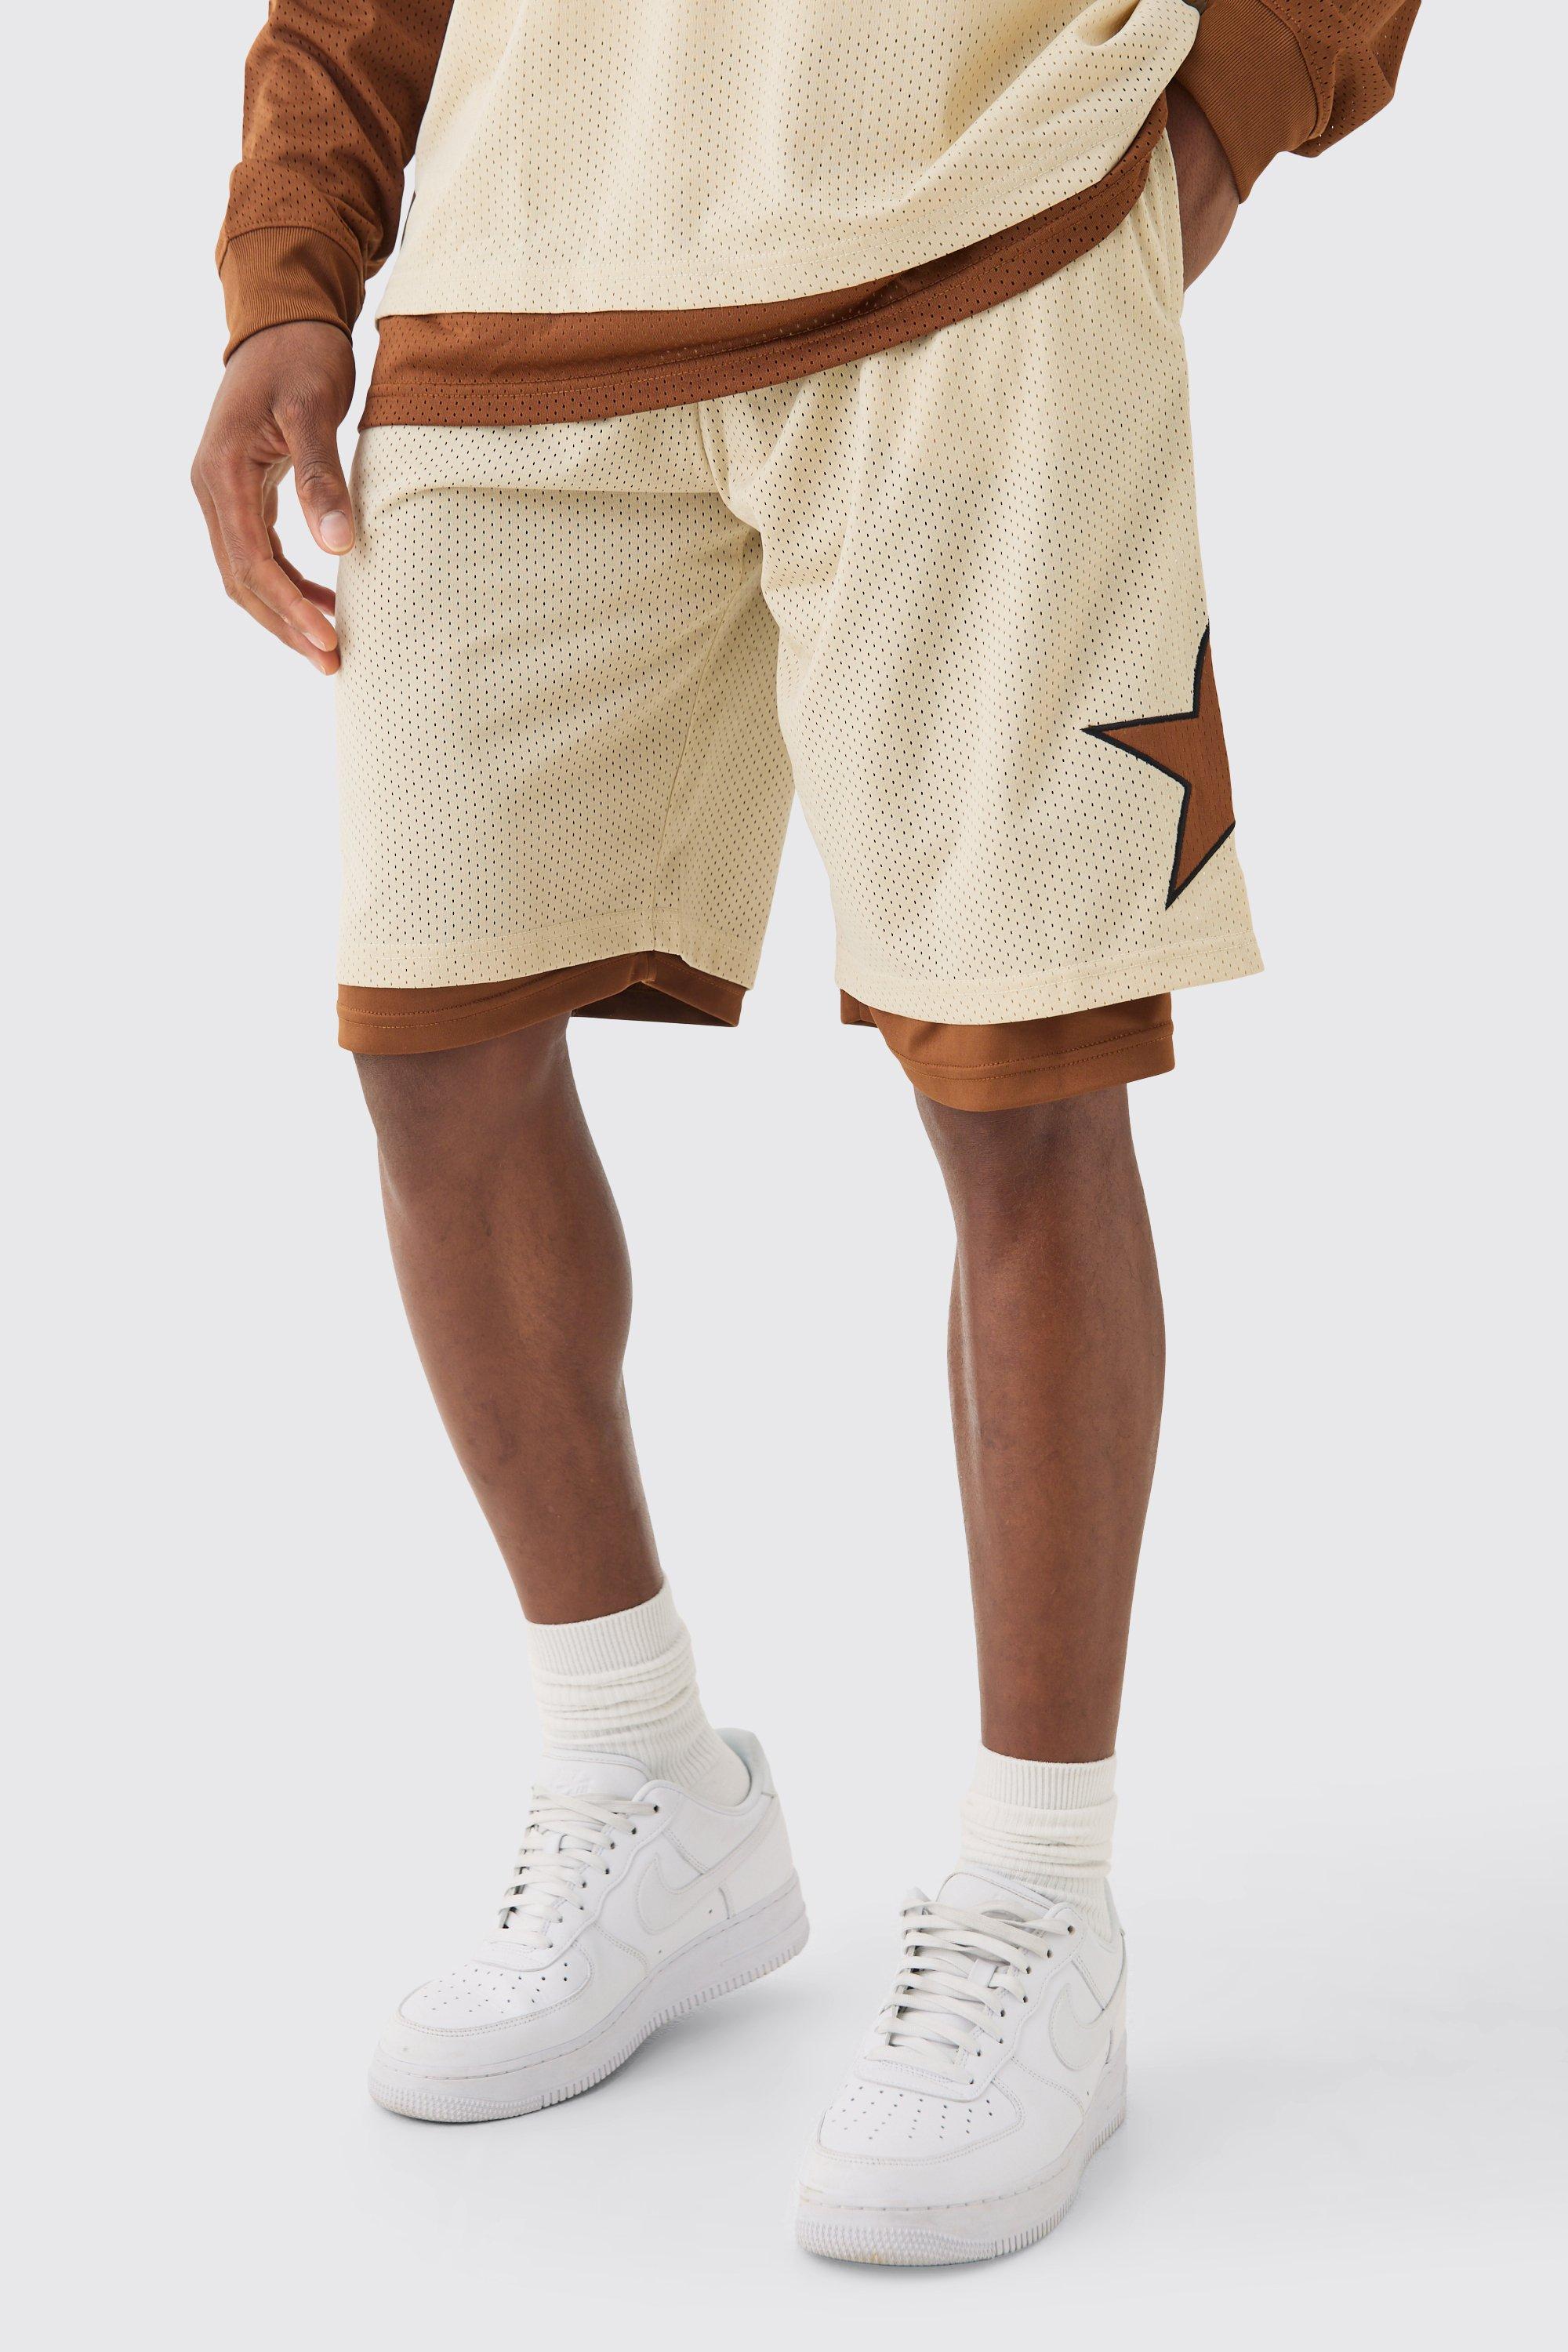 Image of Loose Fit Layered Long Length Basketball Short, Beige